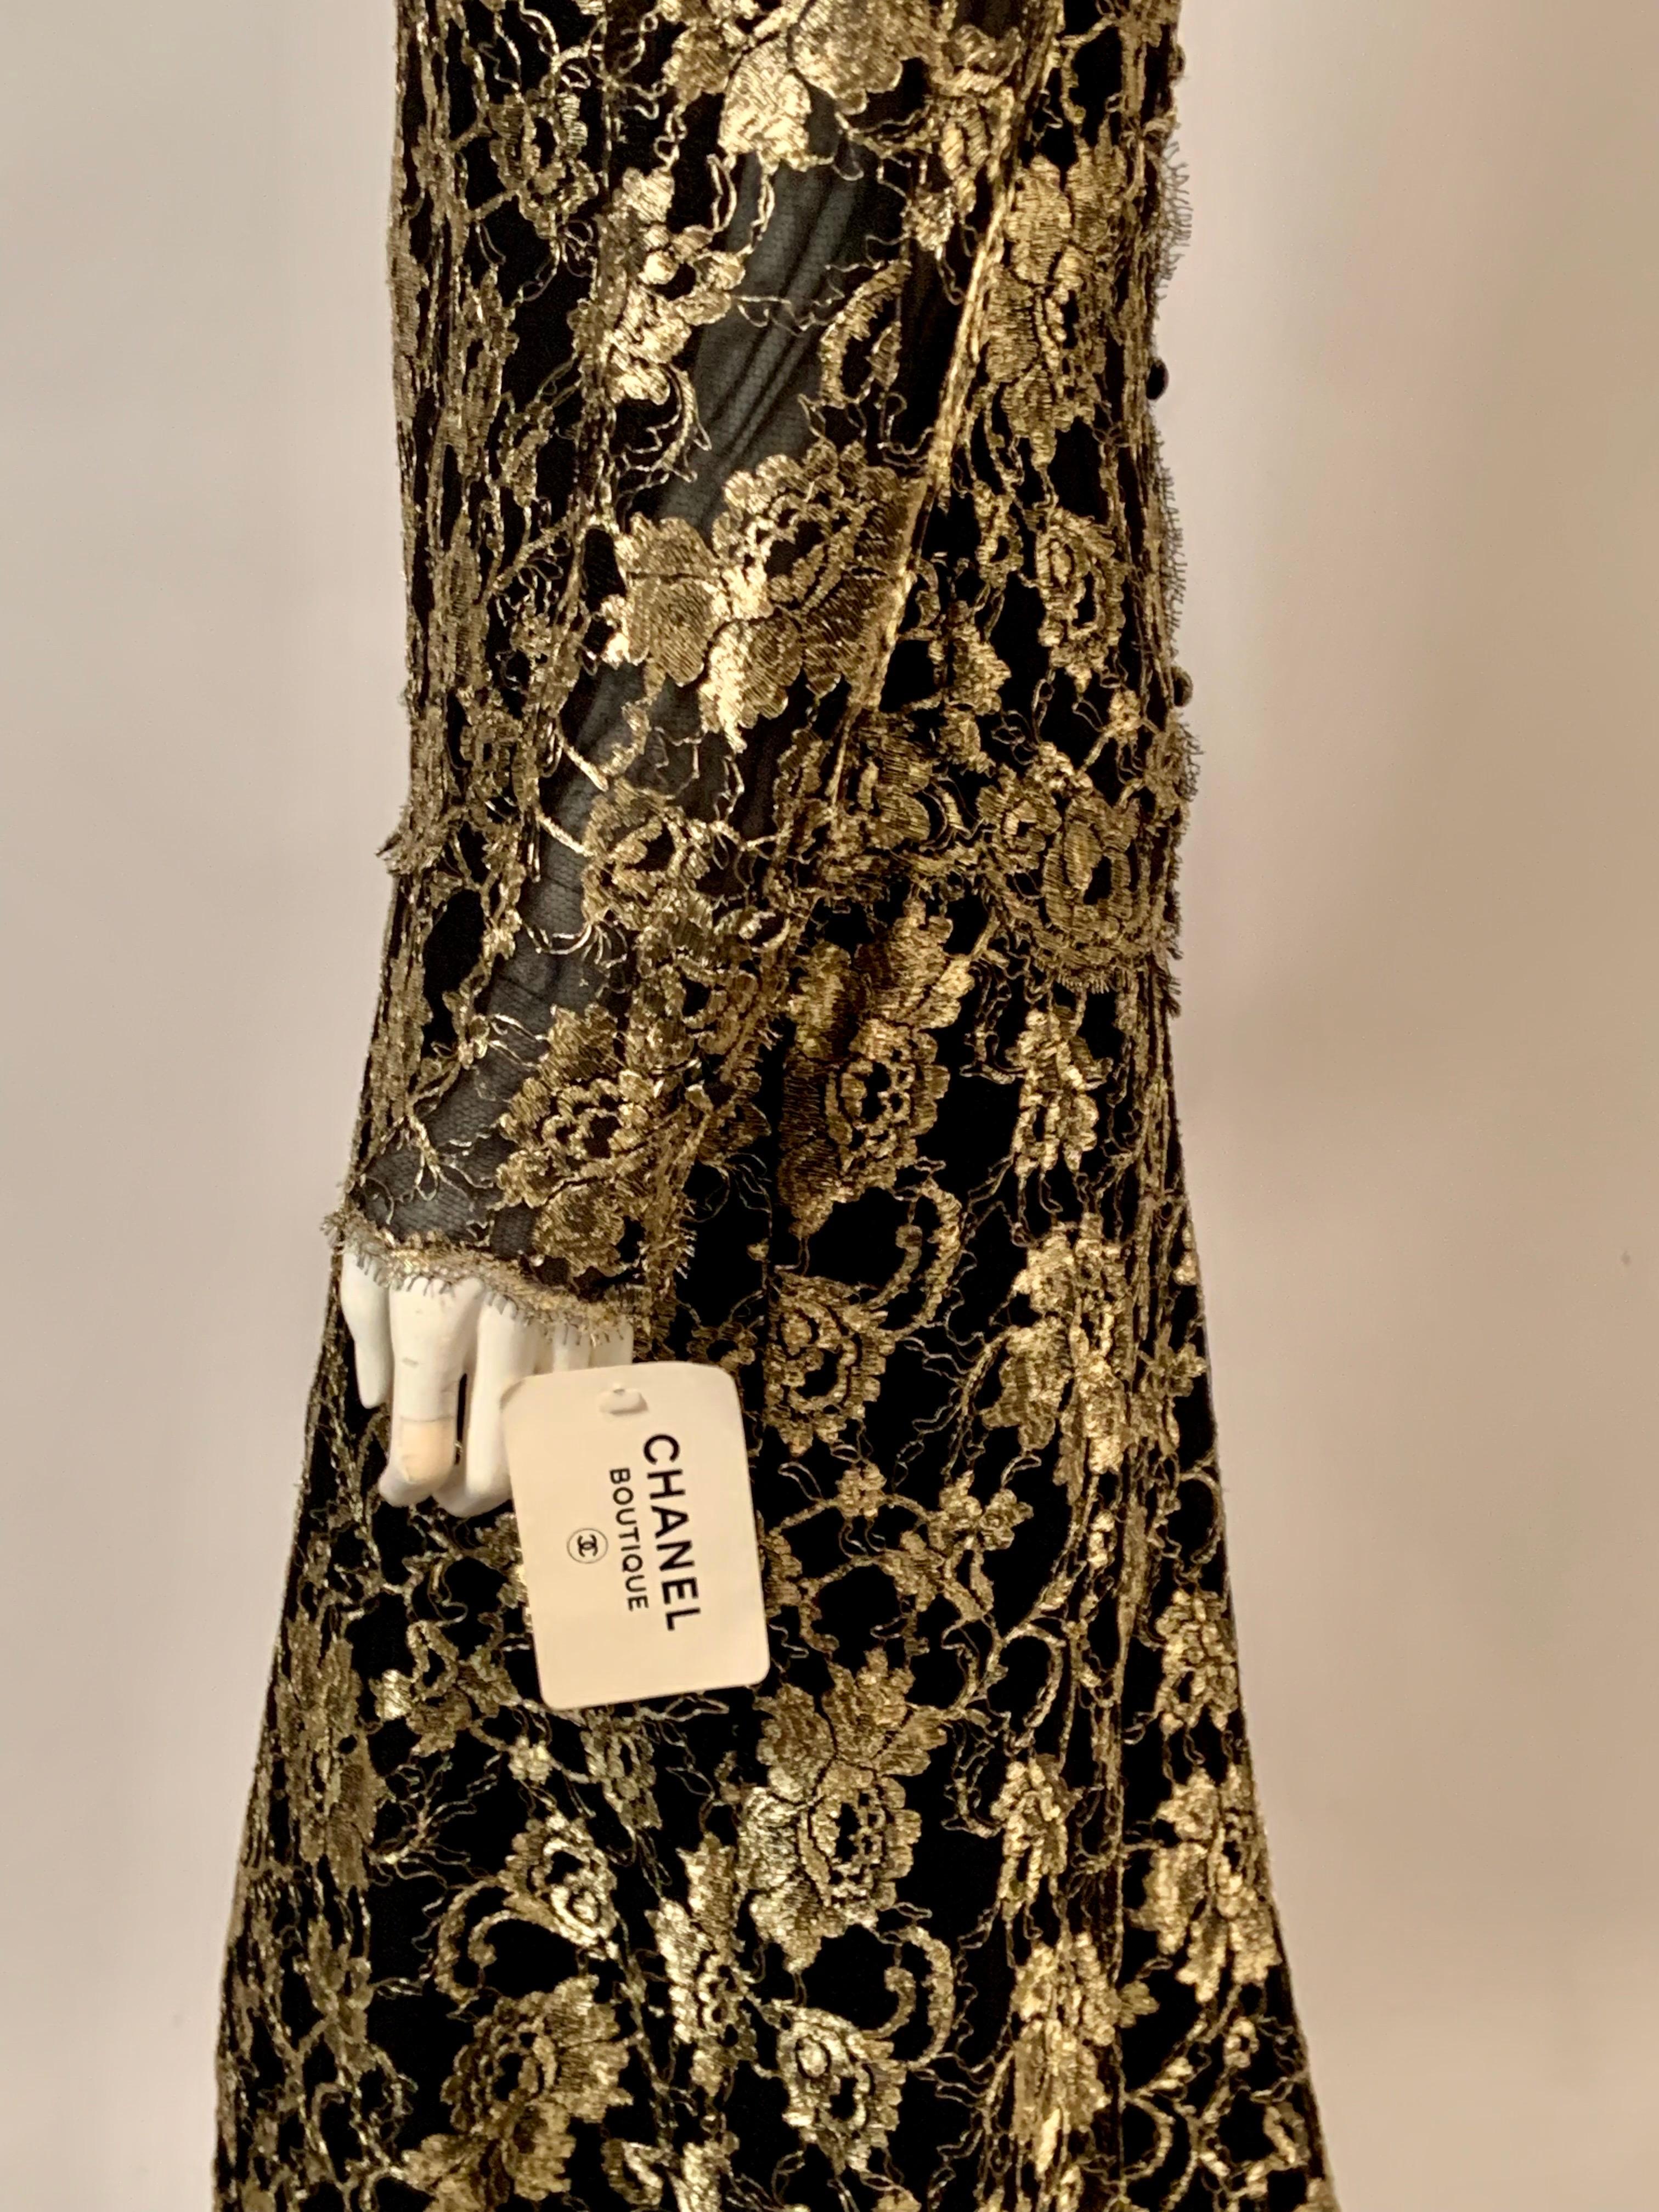 1986 Chanel by Karl Lagerfeld Gold and Black Lace Gown with Train Original Tag For Sale 4